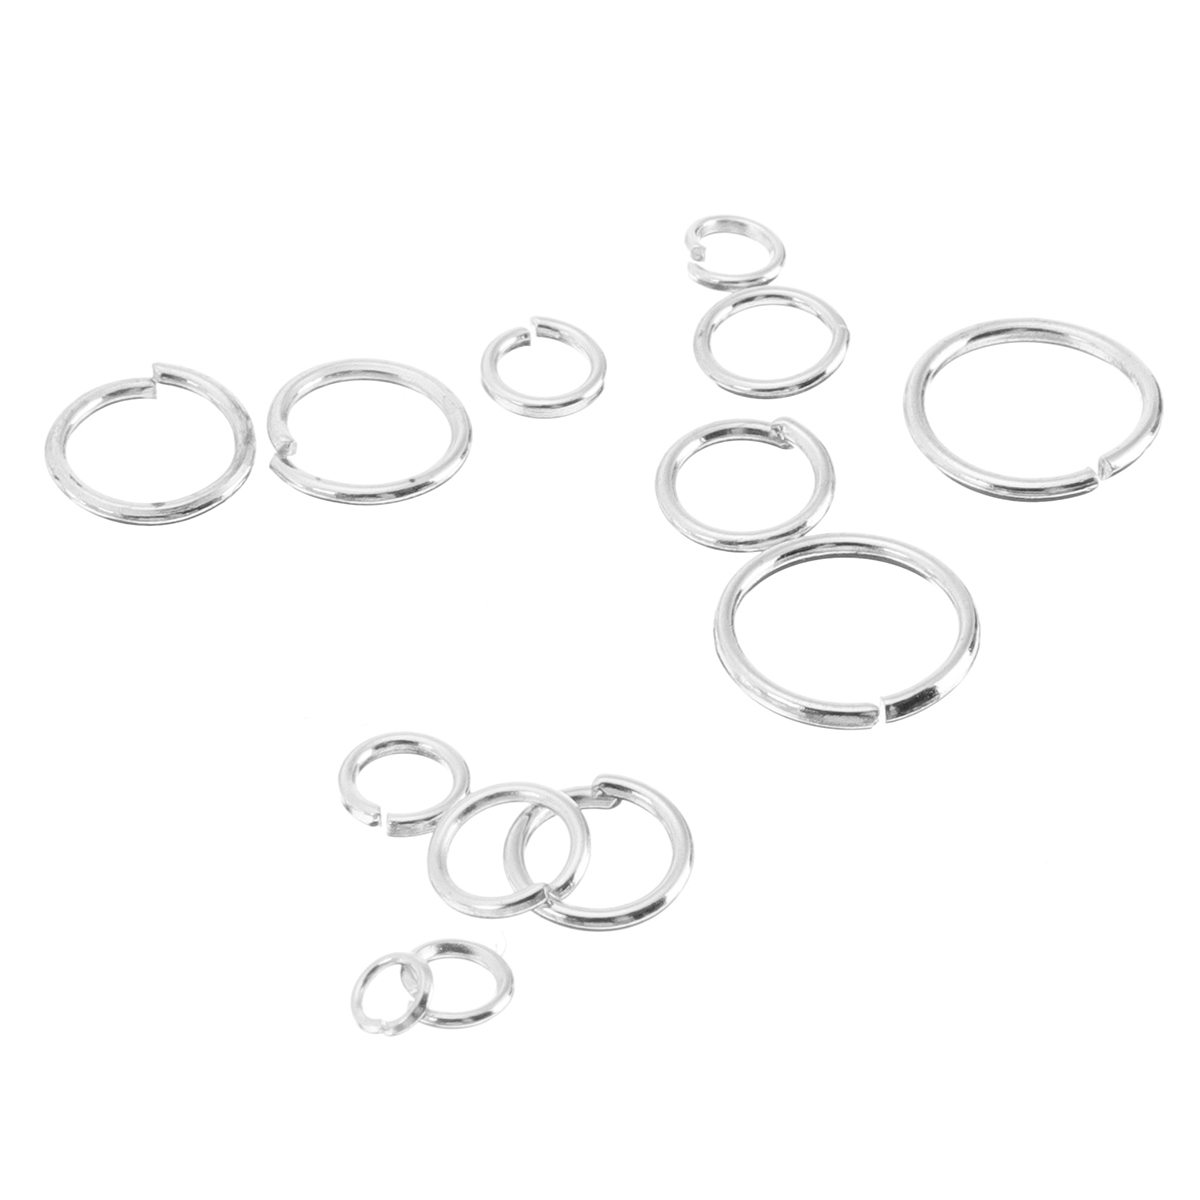 Jewelry-Findings-Making-Starter-Kit-Beading-Repair-Tools-Kit-Pliers-Silver-Beads-Wire-1426208-10